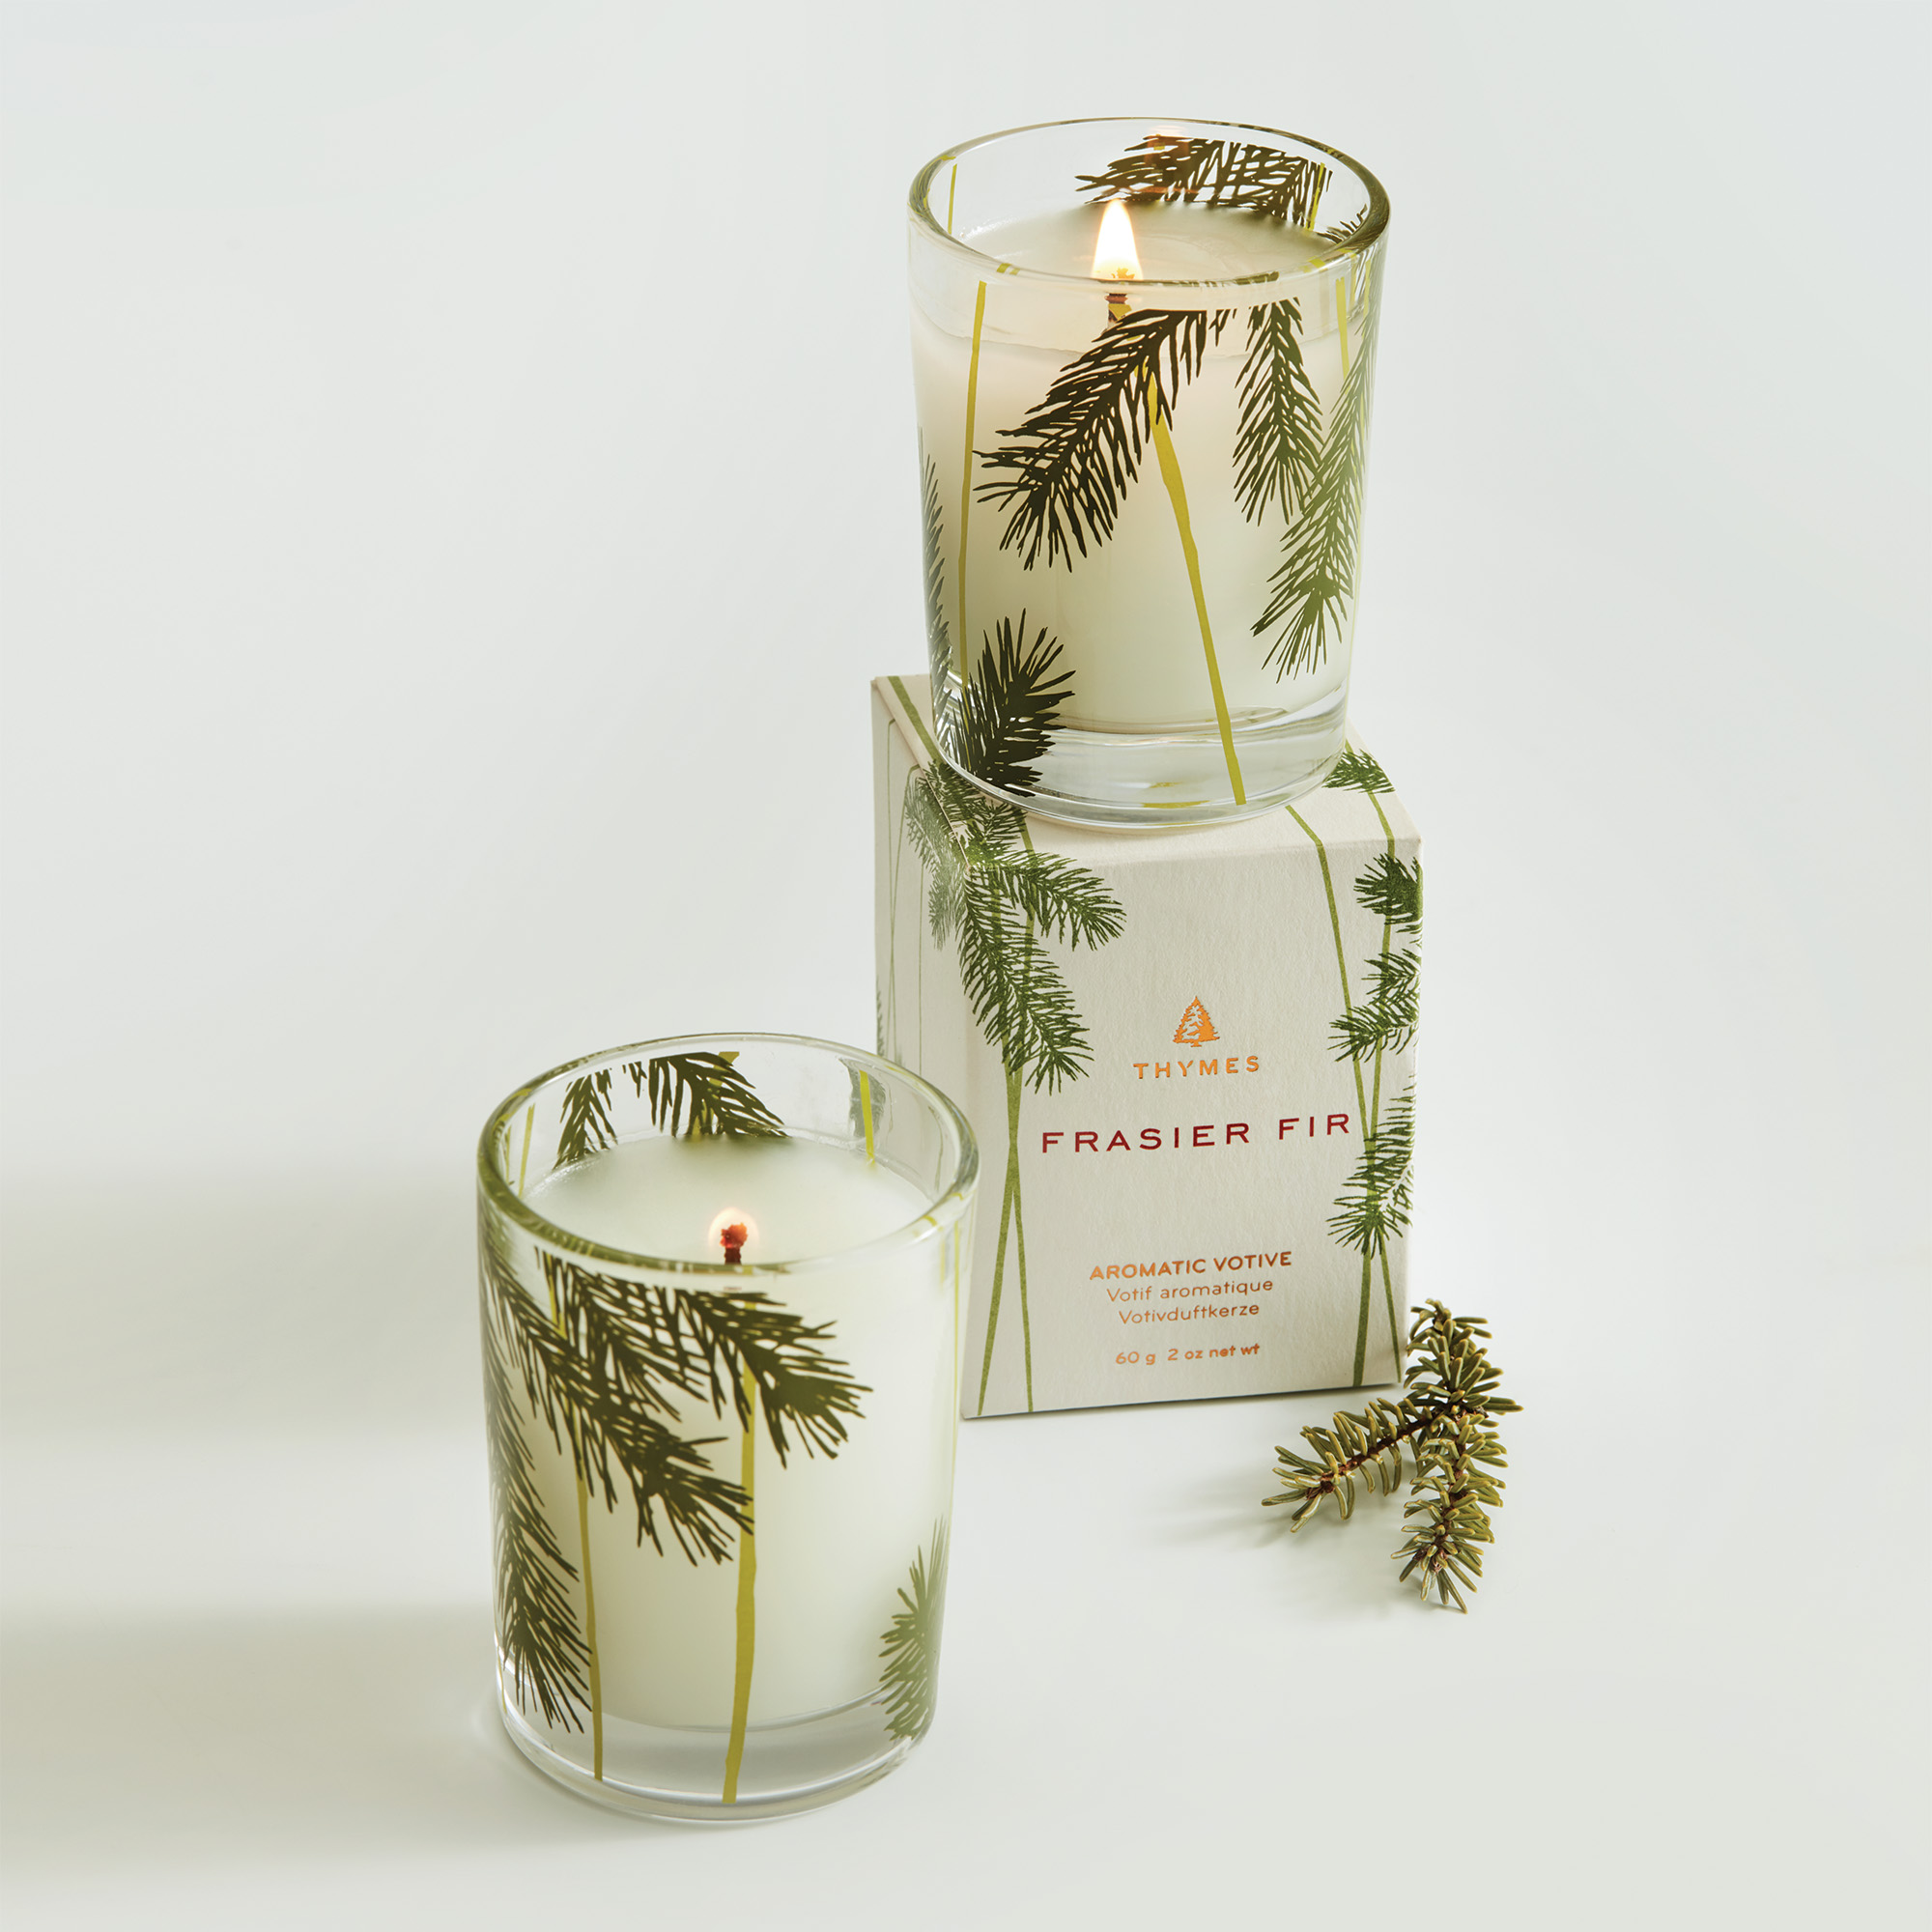 Thymes Frasier Fir Pine Needle Votive Candle - Scented Candle with Notes of  Siberian Fir, Cedarwood, and Sandalwood - Holiday Candle with a Luxury